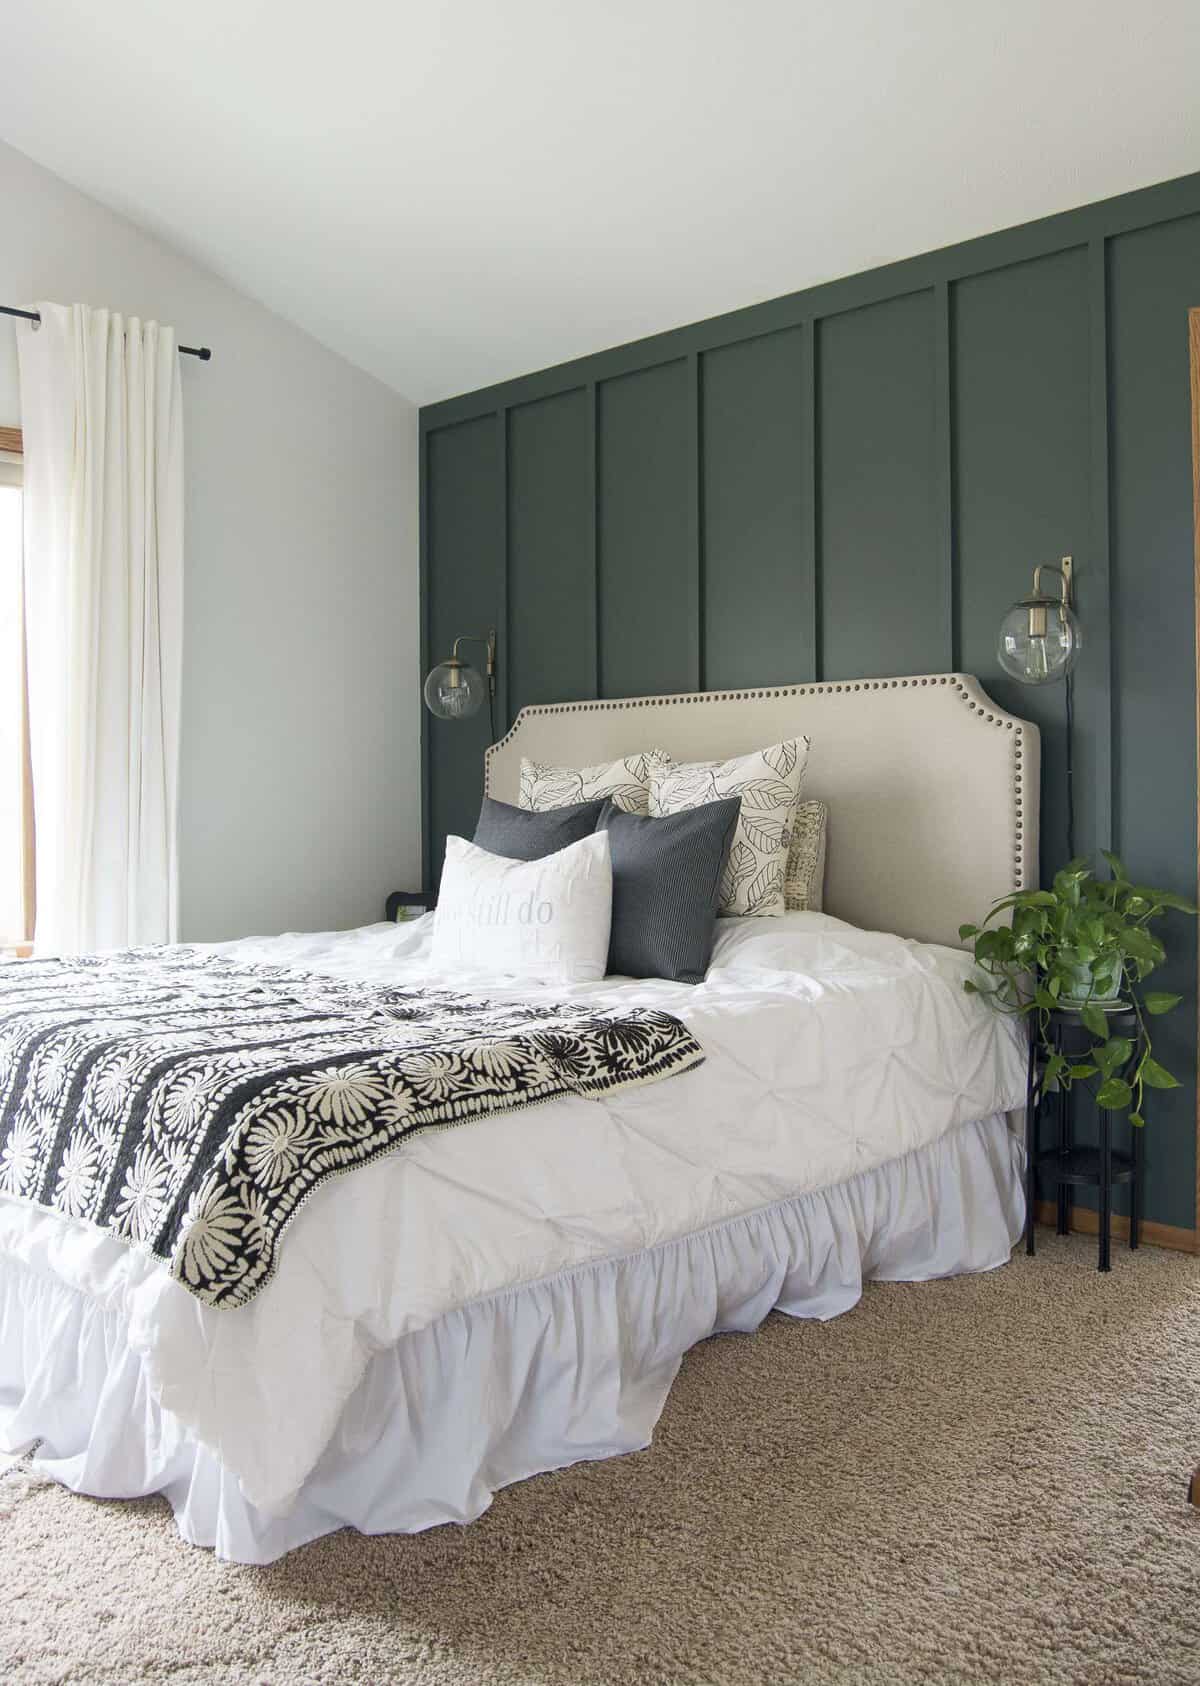 A master bedroom needs to have a few finishing touches to make it a cozy retreat! Today I'm showcasing how just a few additions can turn a bland bedroom into an oasis with modern farmhouse bedroom decor. Head to the blog to read more!